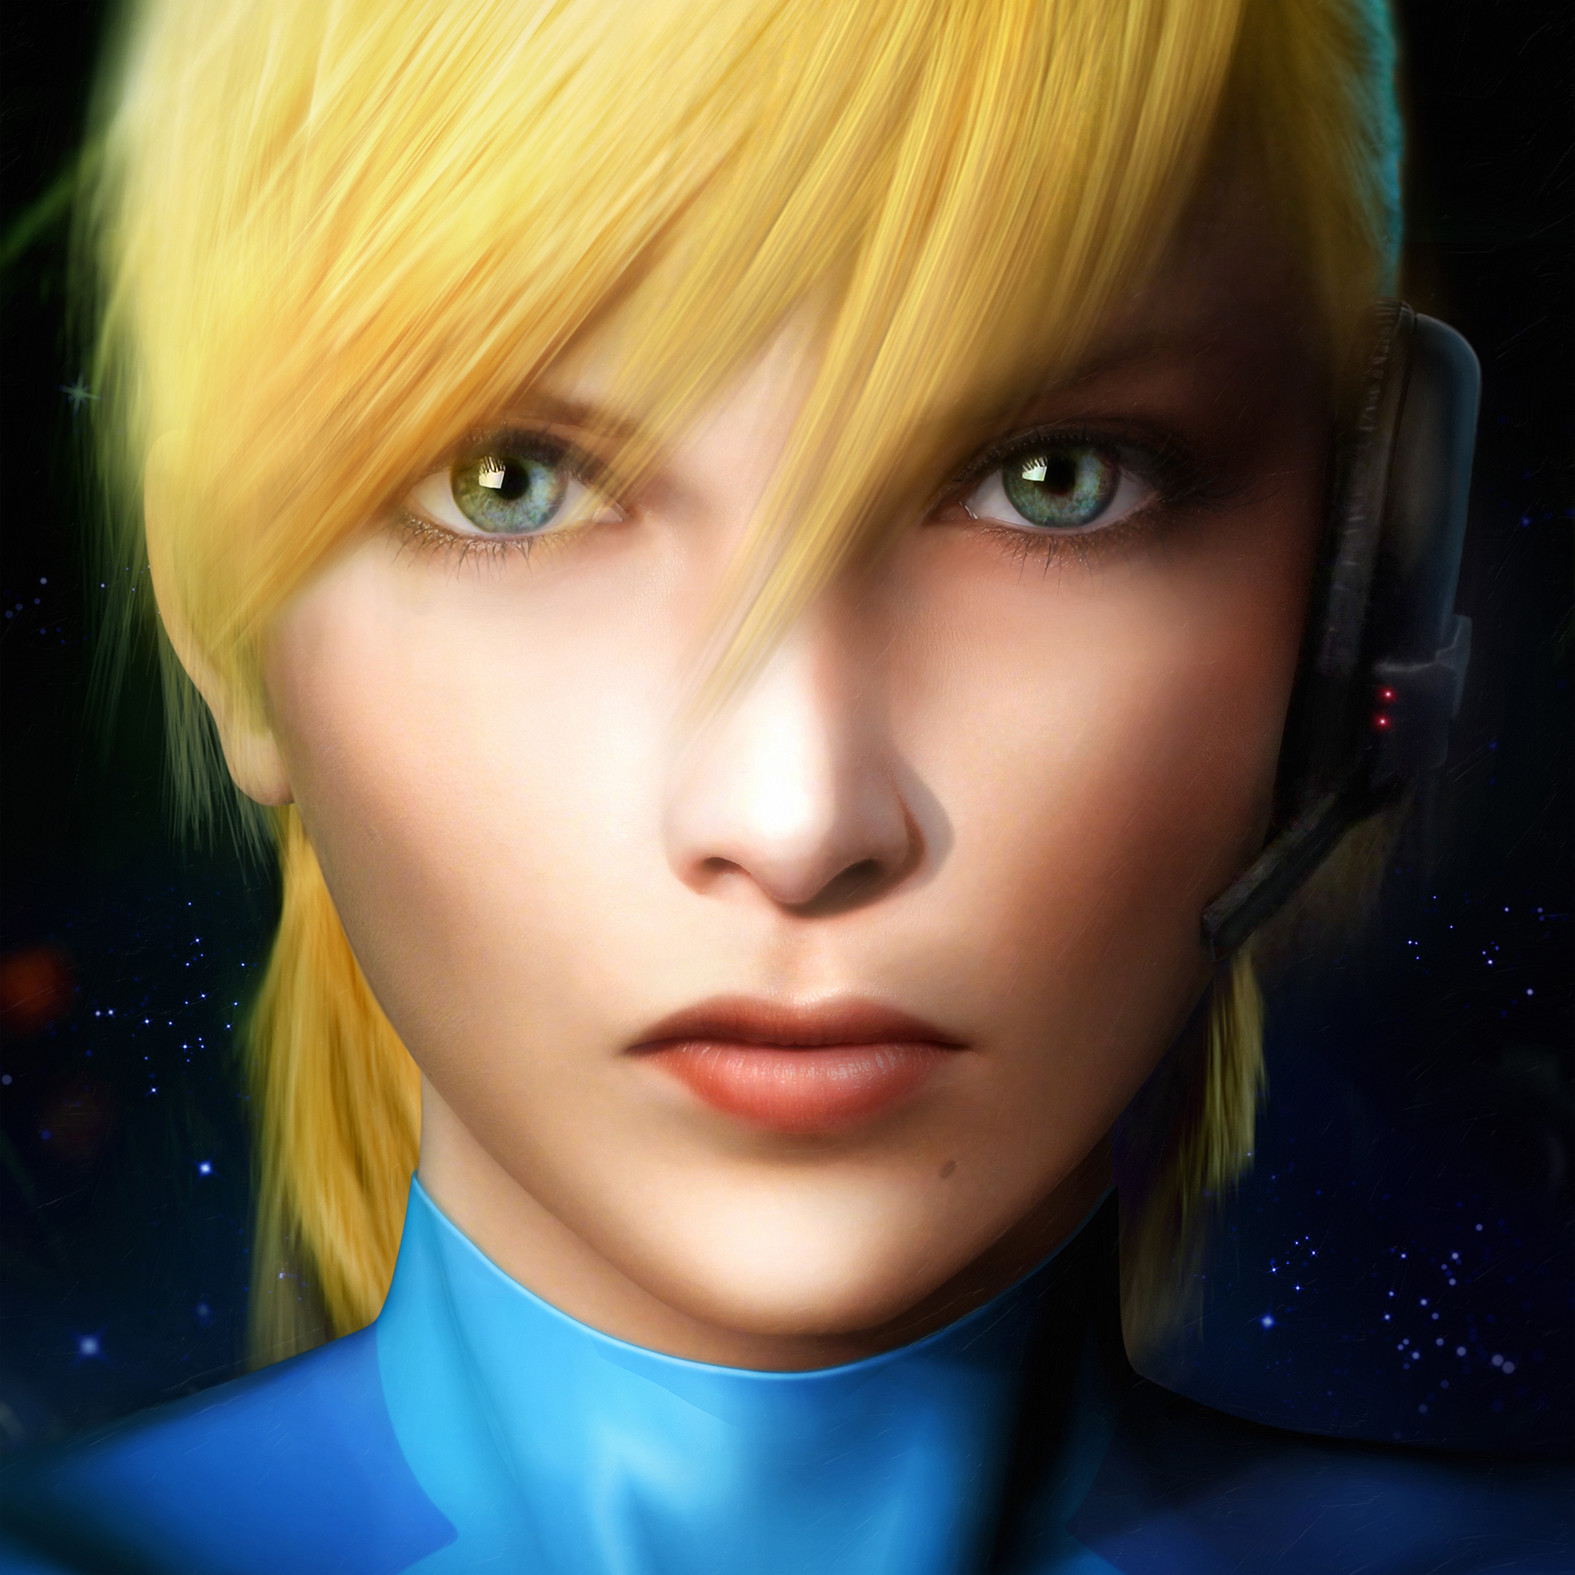 metroid other m wallpaper